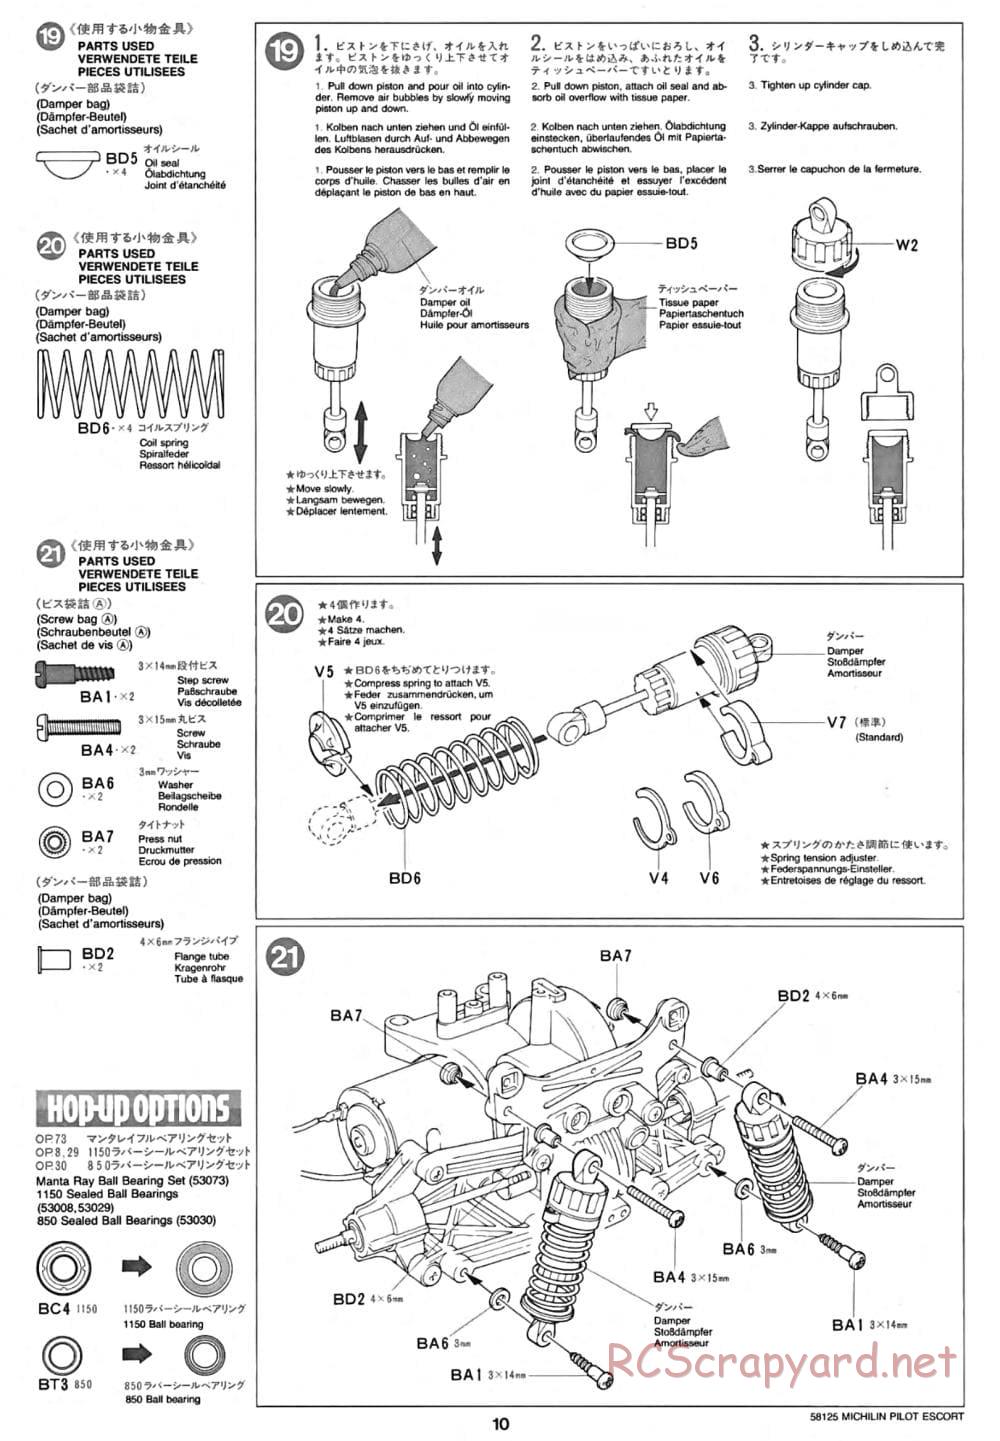 Tamiya - Michelin Pilot Ford Escort RS Cosworth - TA-01 Chassis - Manual - Page 10